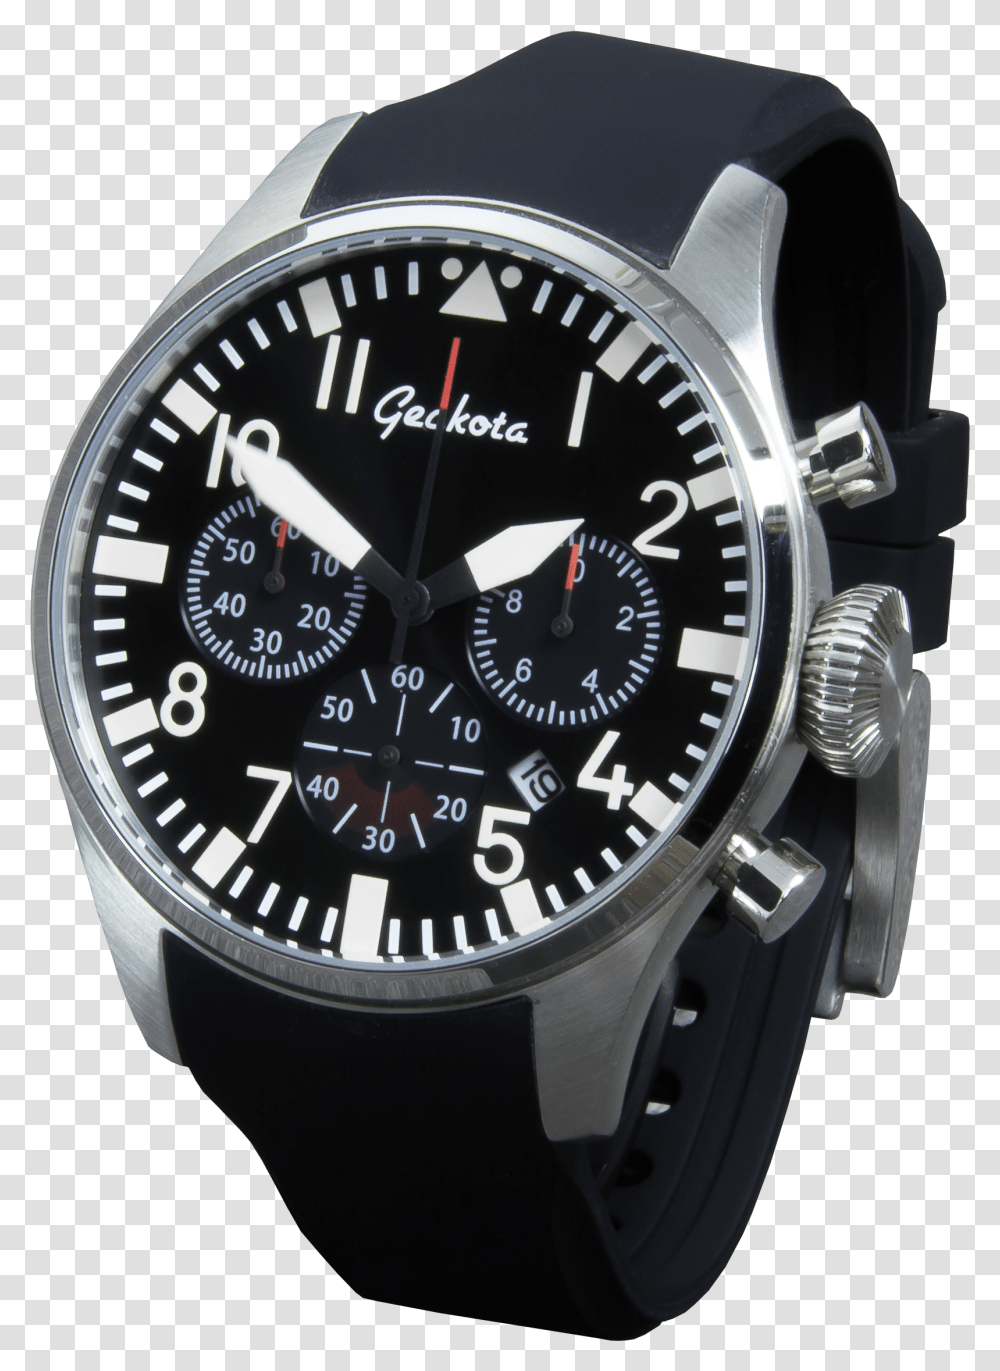 Watches Image Watches, Wristwatch Transparent Png